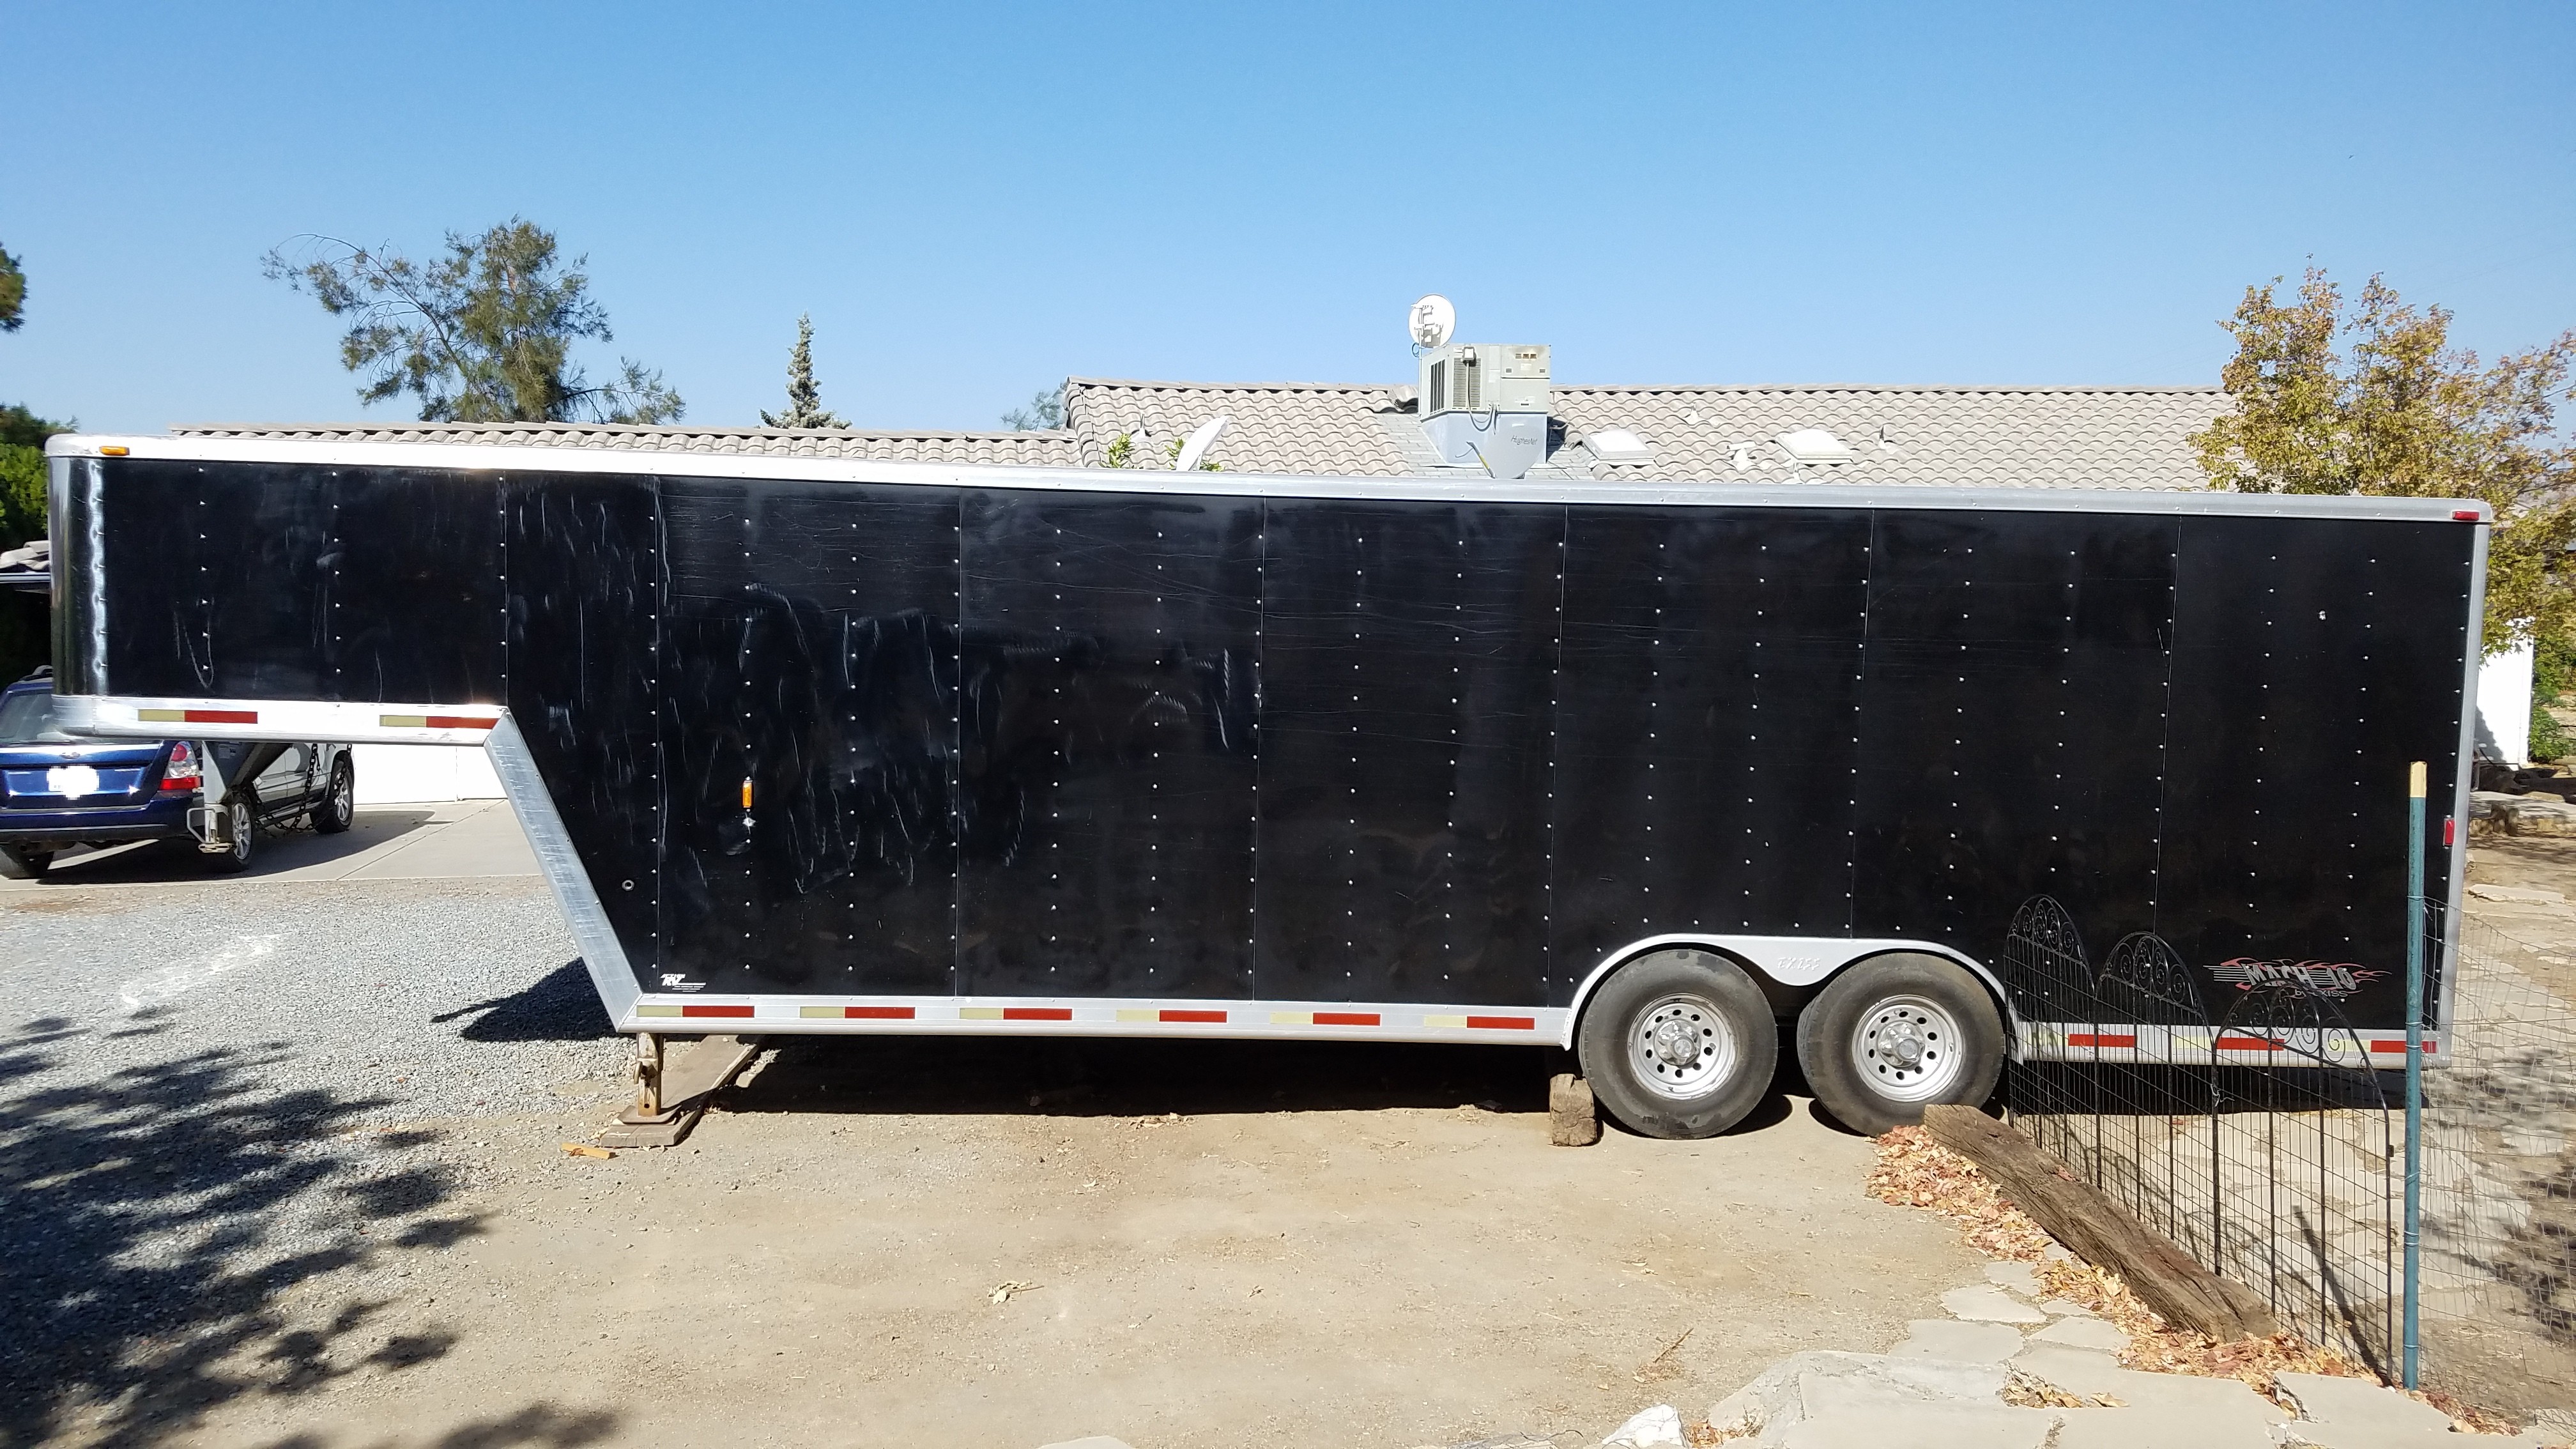 Buy & Sell New & Used Trailers 2003 Exiss Mach 10 Gooseneck 24ft Enclosed Car Trailer at TrailerShopper